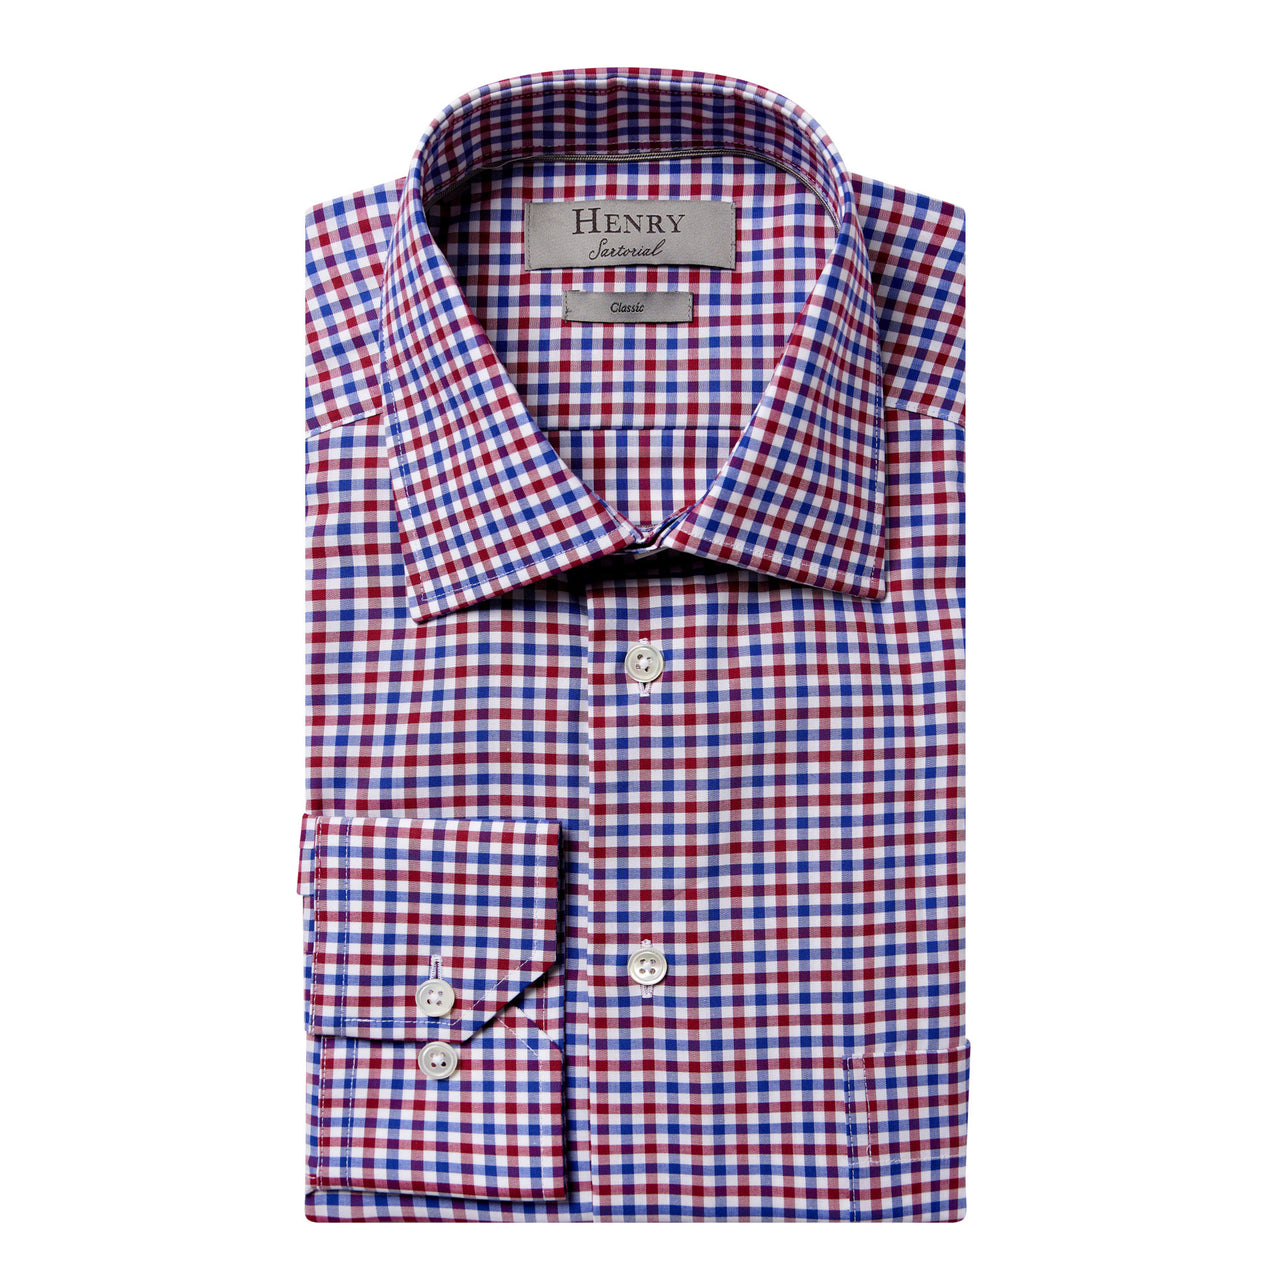 HENRY SARTORIAL Check Casual Shirt RED/BLUE/WHITE